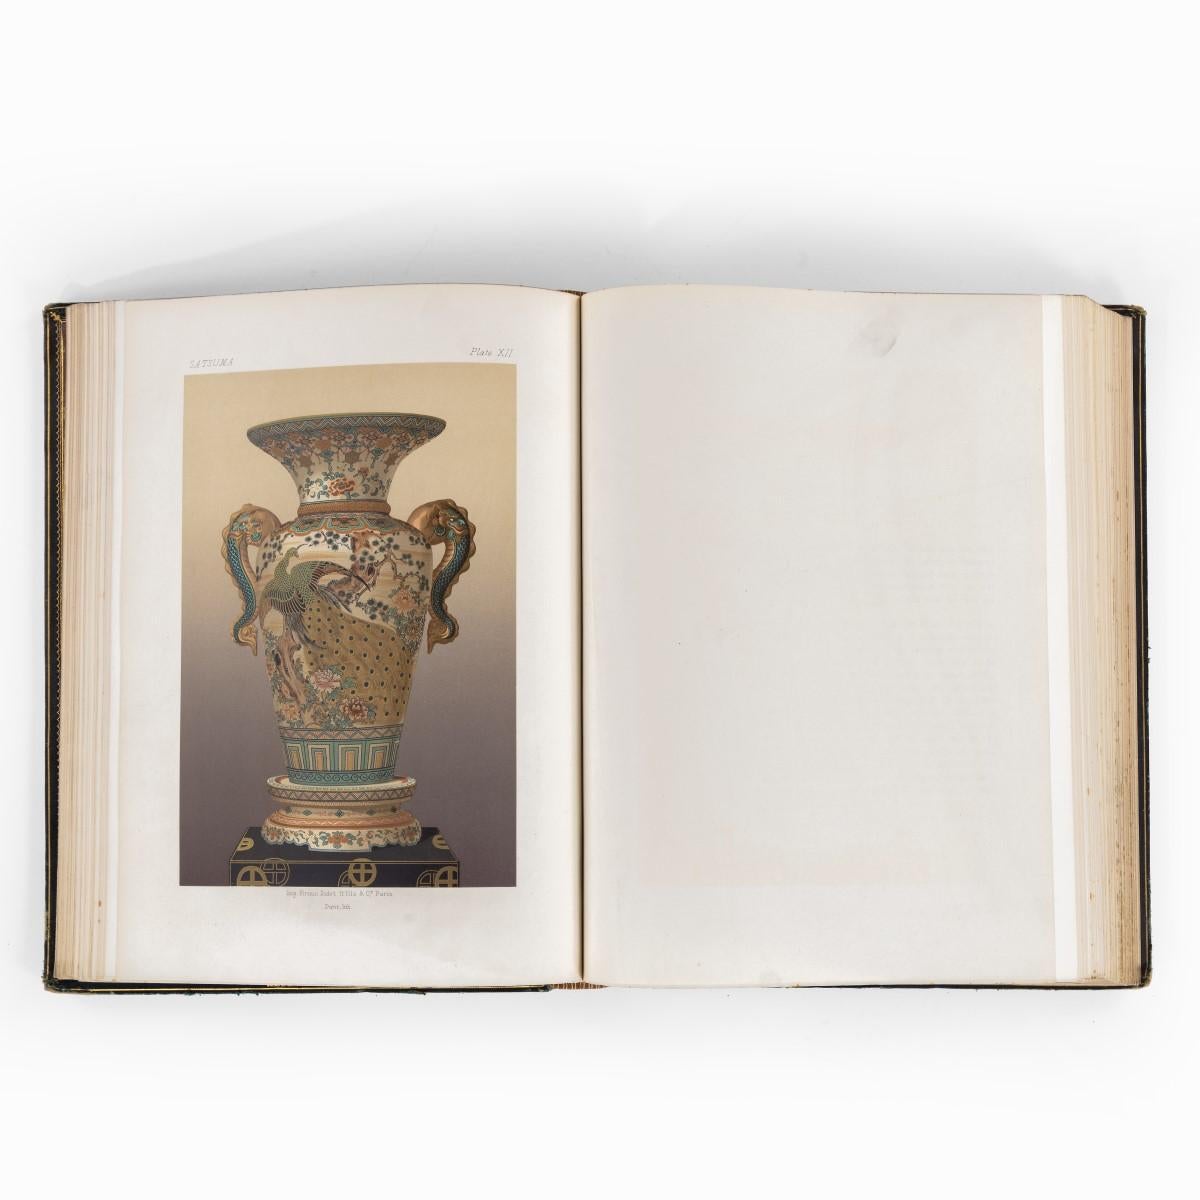 English Audsley, George Ashdown and James, Lord Bowes ‘The Keramic Art of Japan’ For Sale